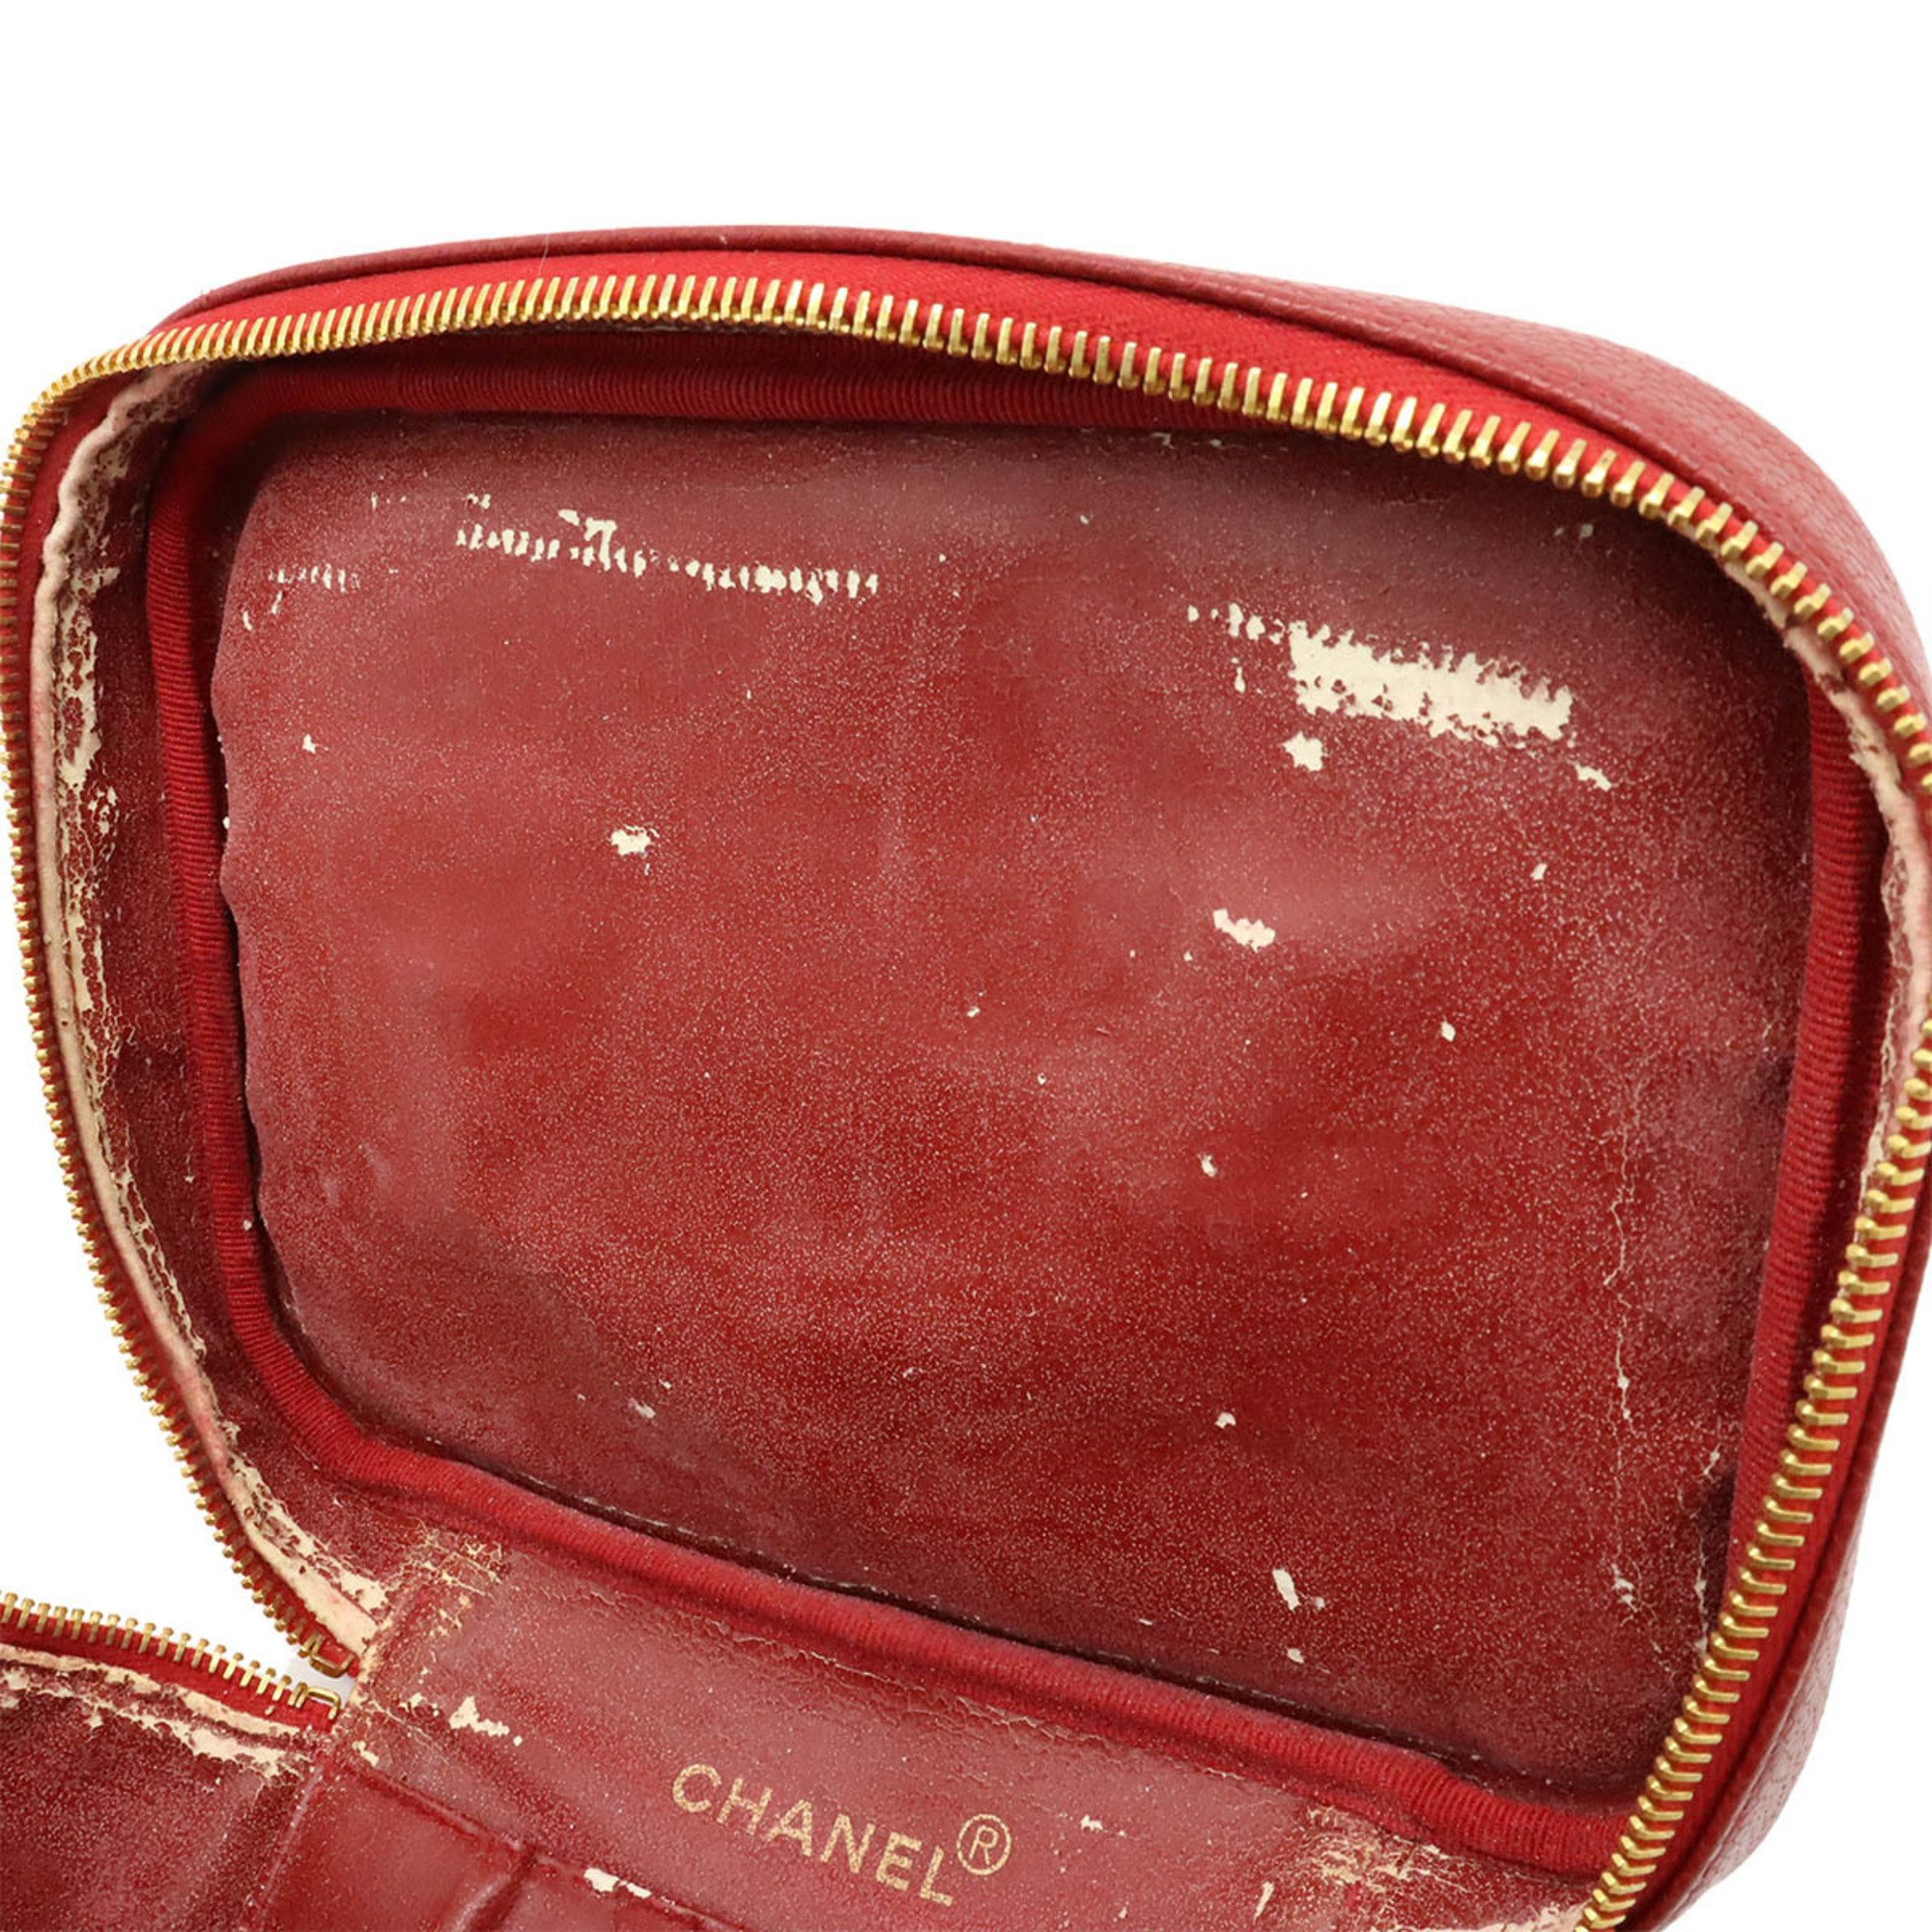 CHANEL Caviar Skin Vanity Bag Handbag Coco Mark Pouch Leather Red A01997